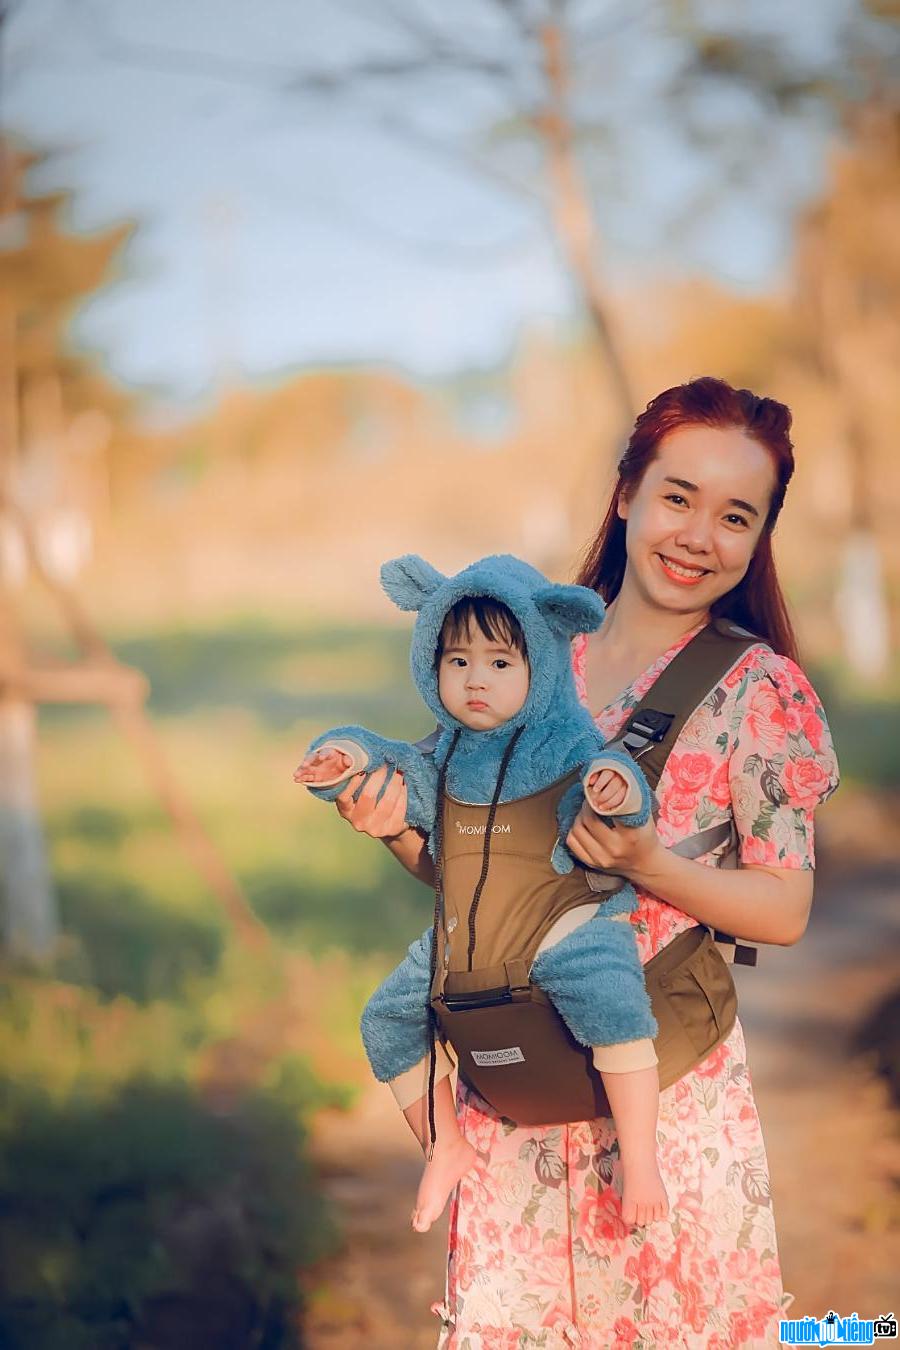  Lovely moments of Hoang Thi and her daughter